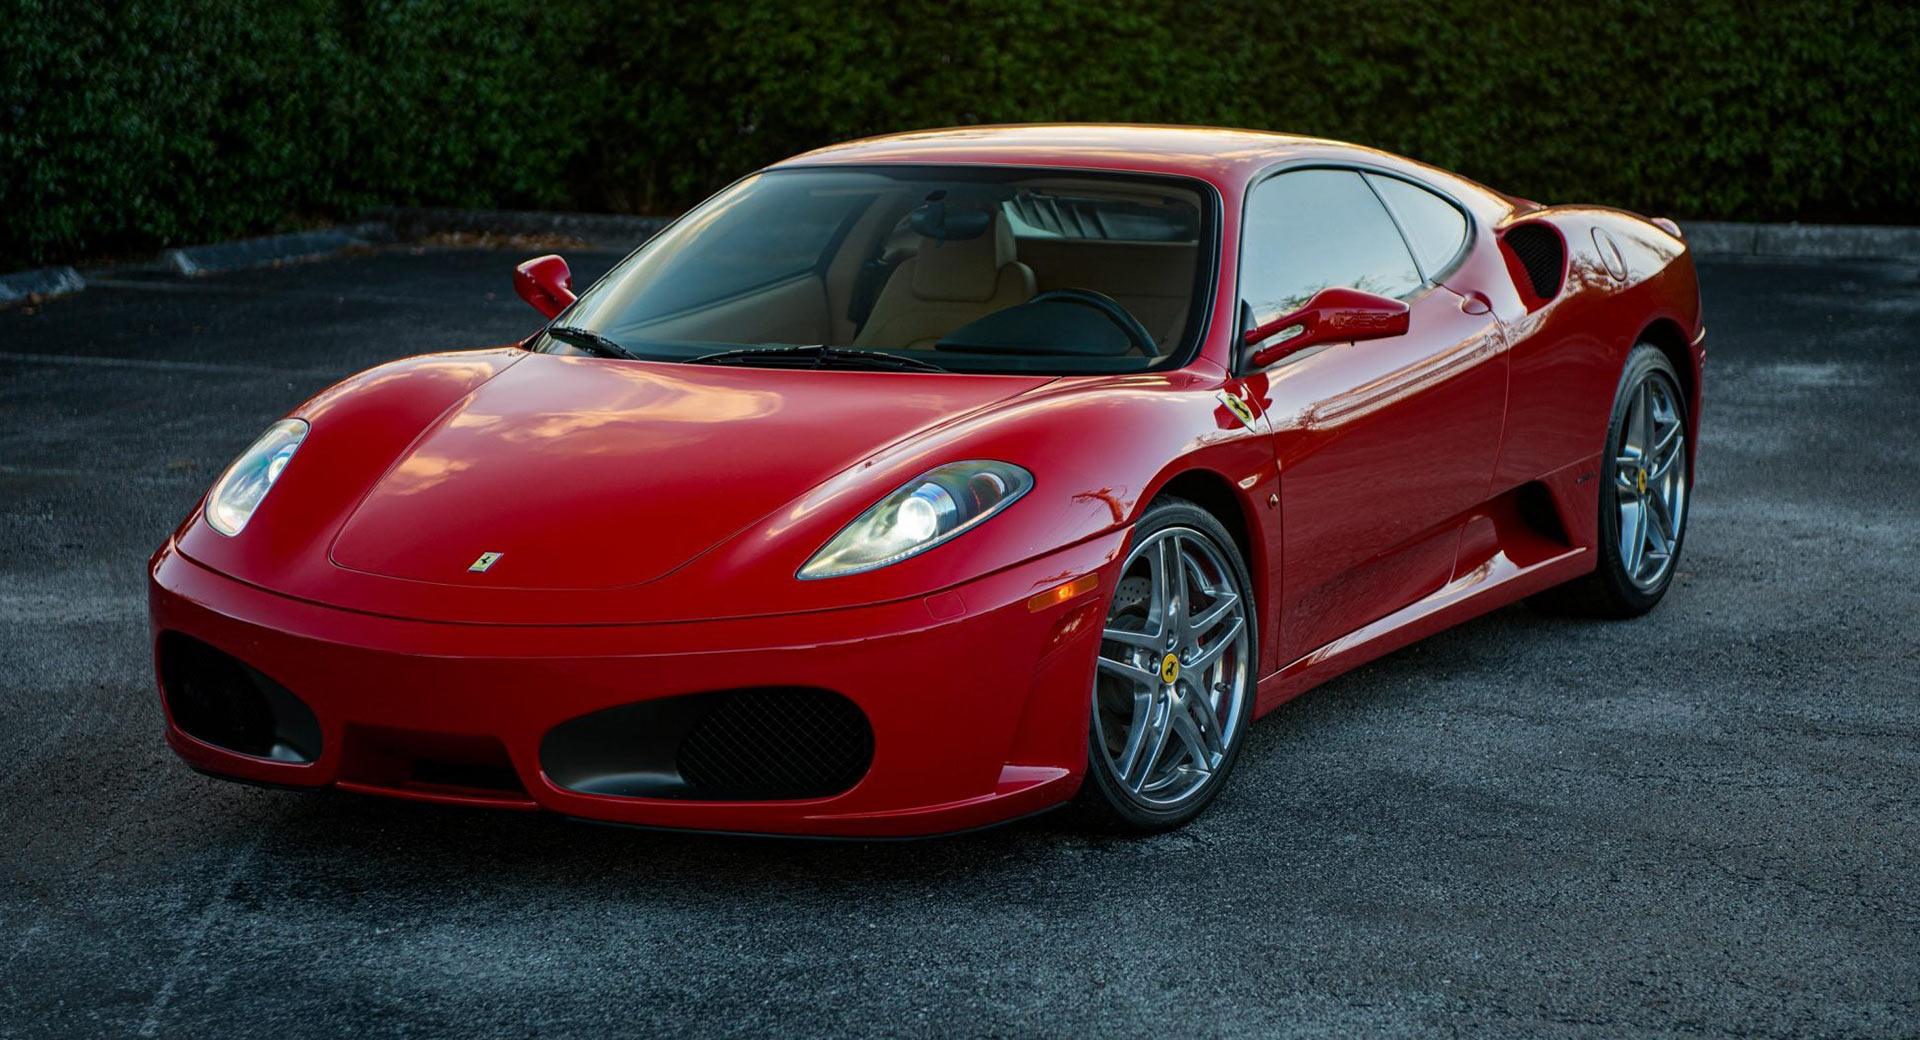 Enjoy A Proper Stick Shift And Naturally Aspirated V8 With This 2006 Ferrari  F430 | Carscoops